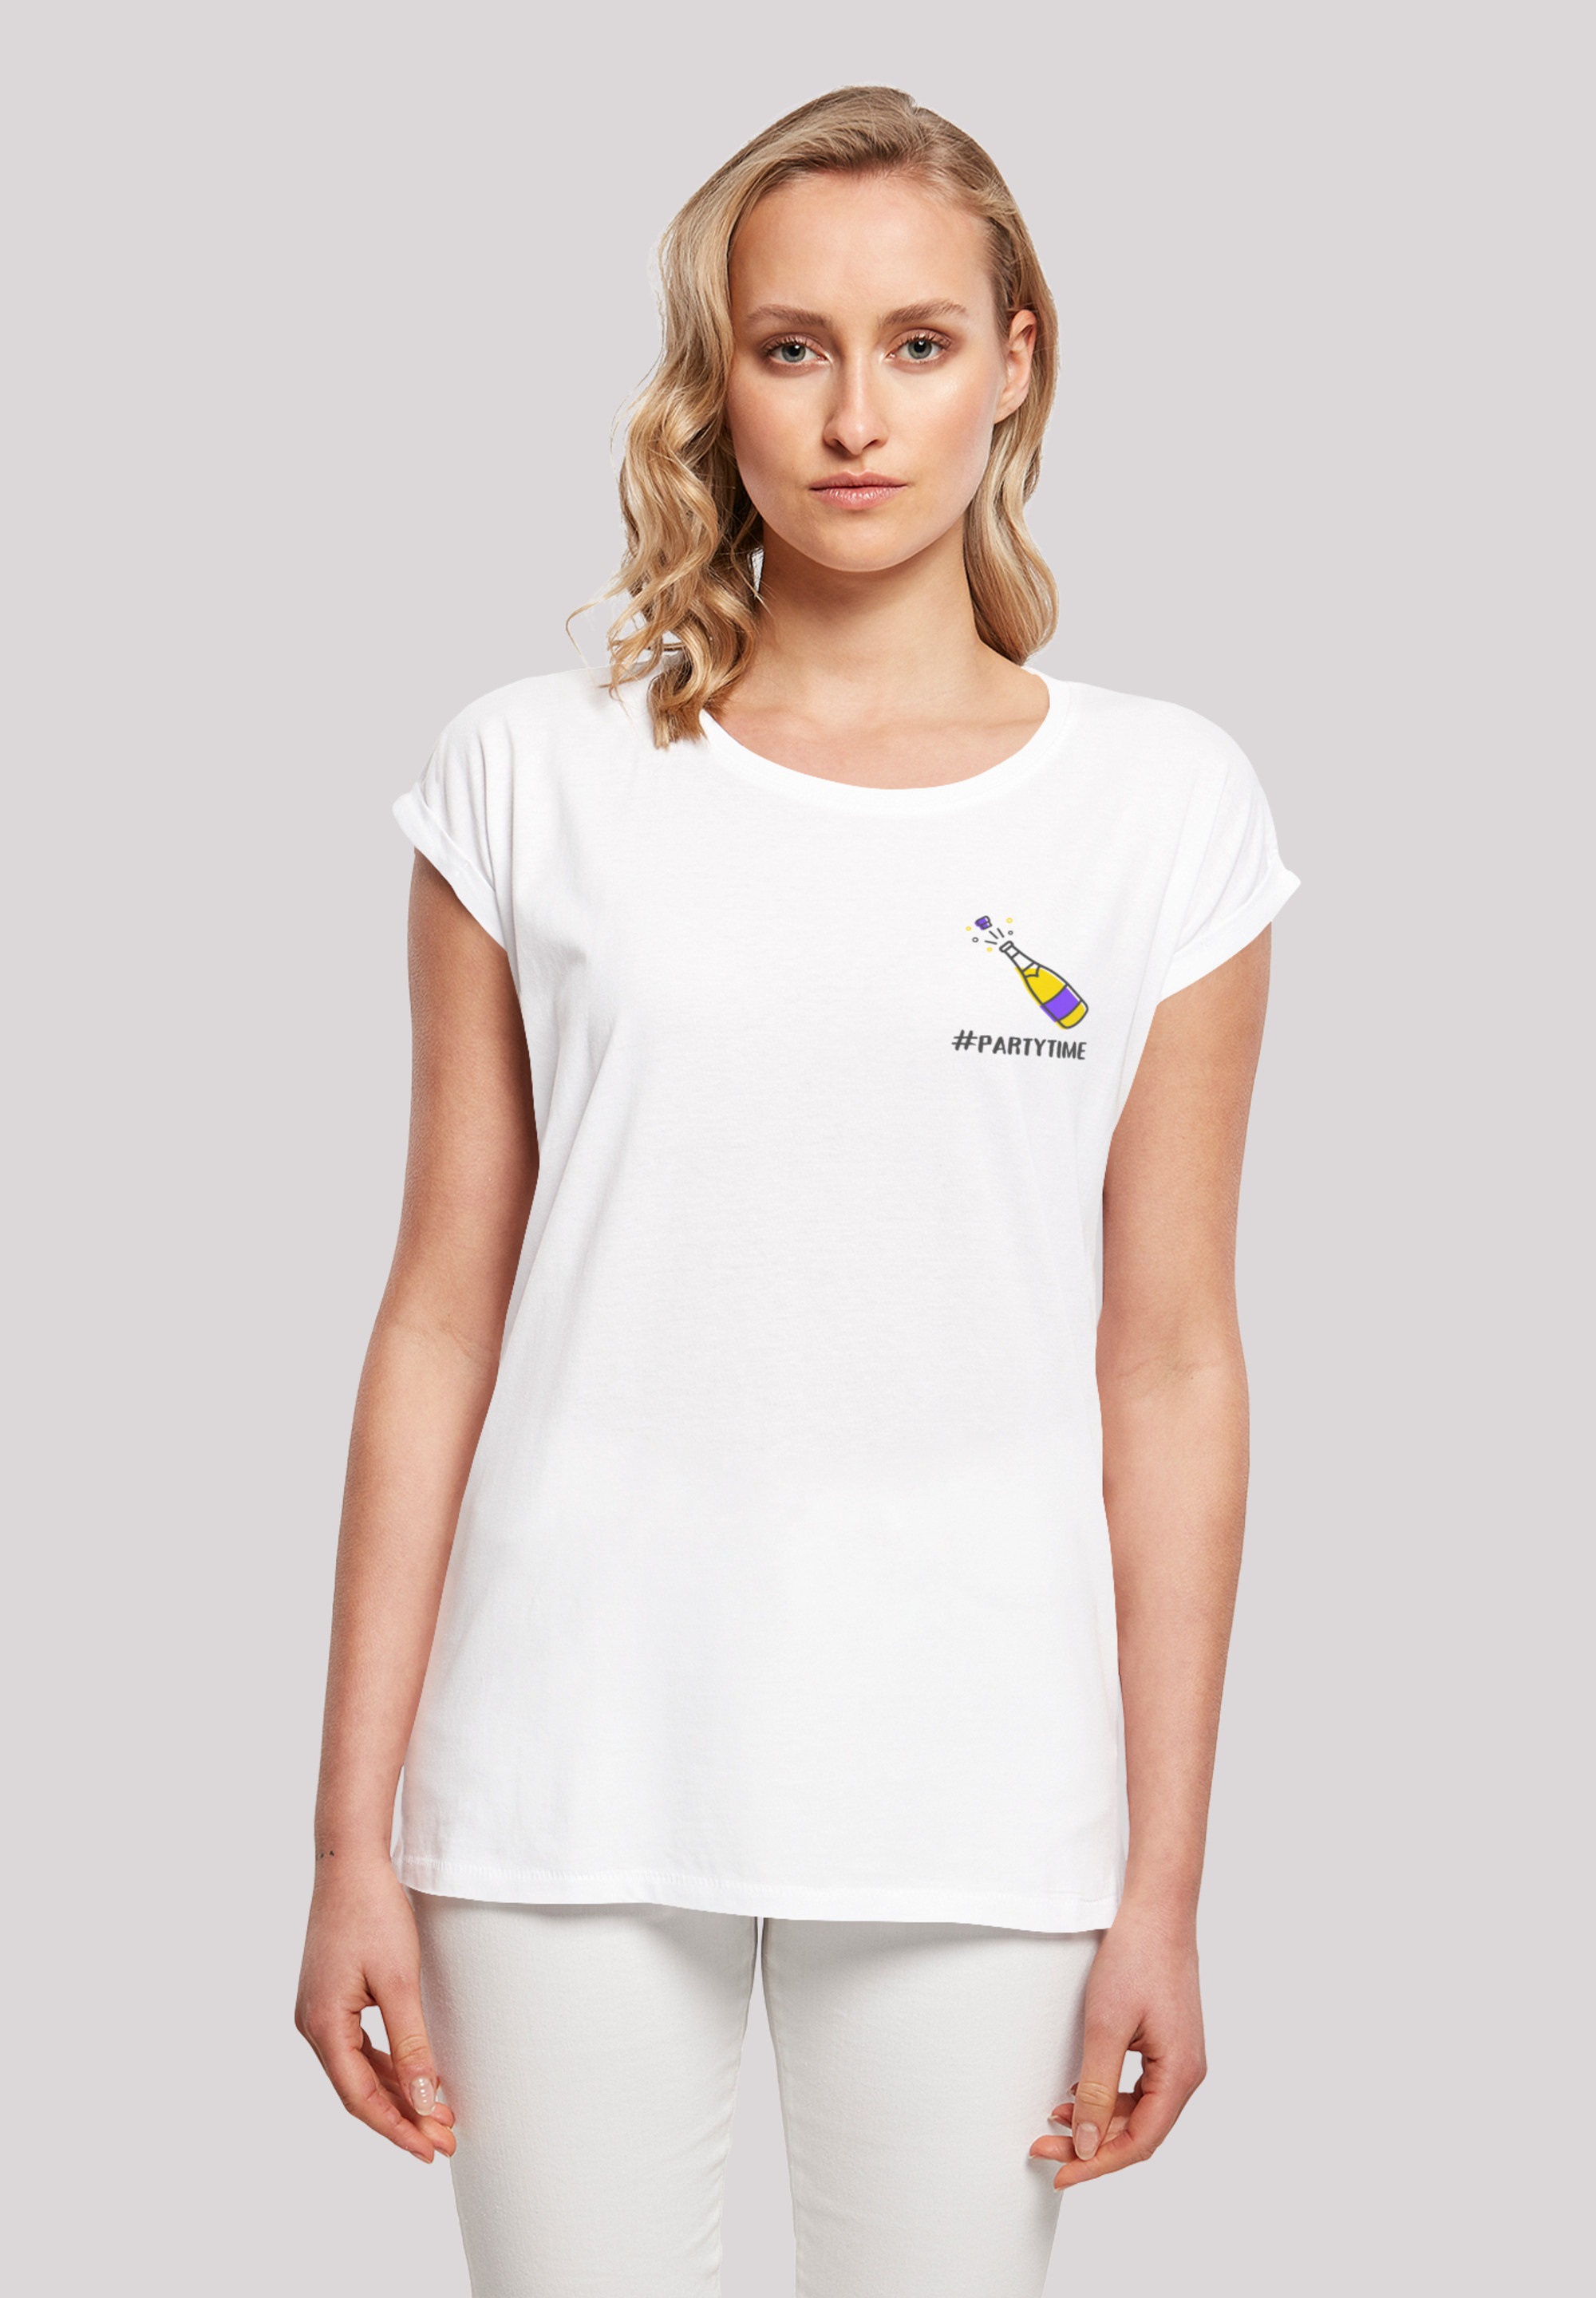 T-Shirt »Silvester Party #partytime«, Print